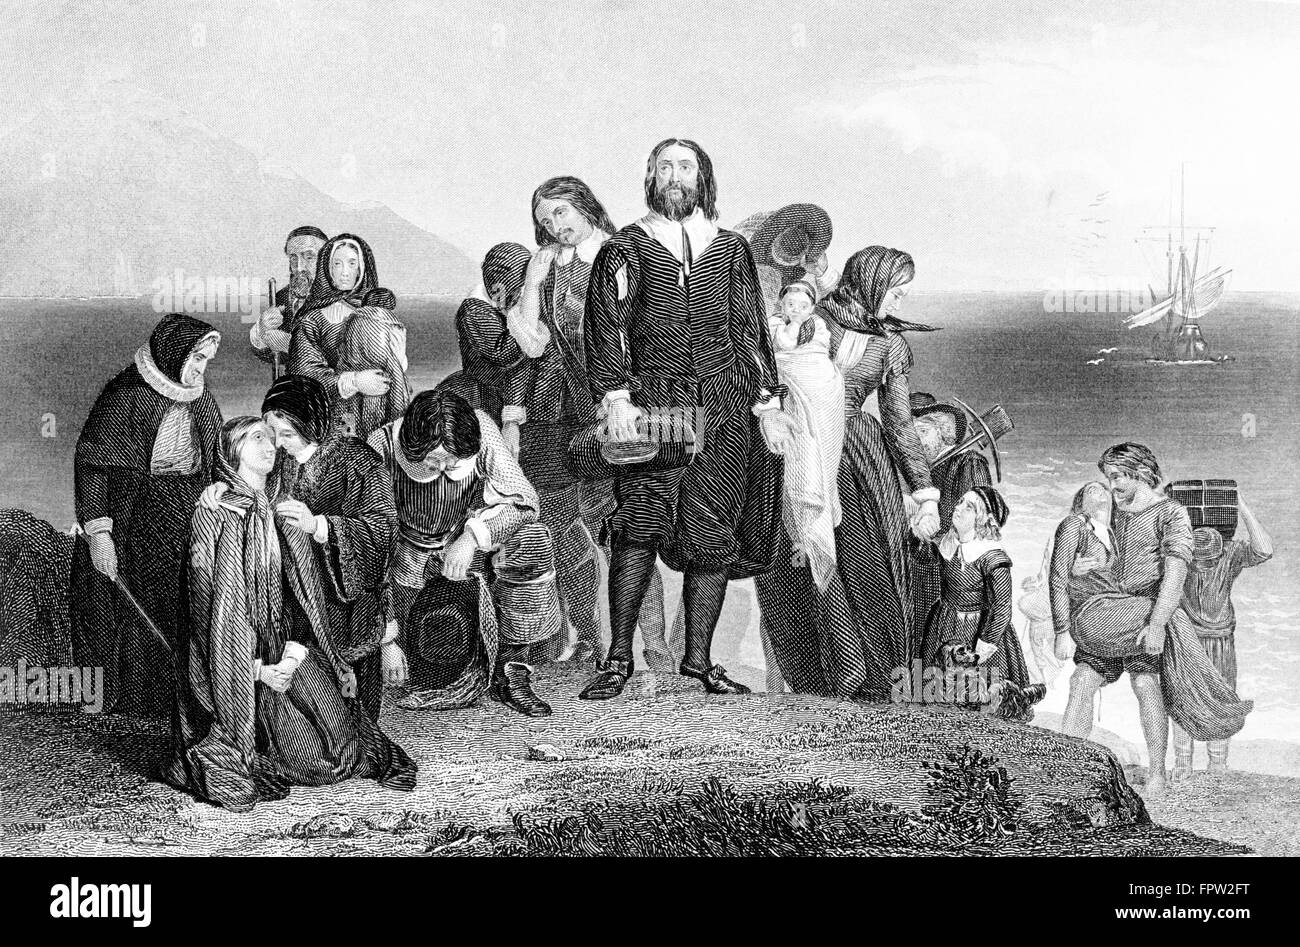 1620s FIRST LANDING OF MAYFLOWER PILGRIMS LEAD BY MYLES STANDISH NOVEMBER 9 1620 PLYMOUTH BAY COLONY MA USA Stock Photo